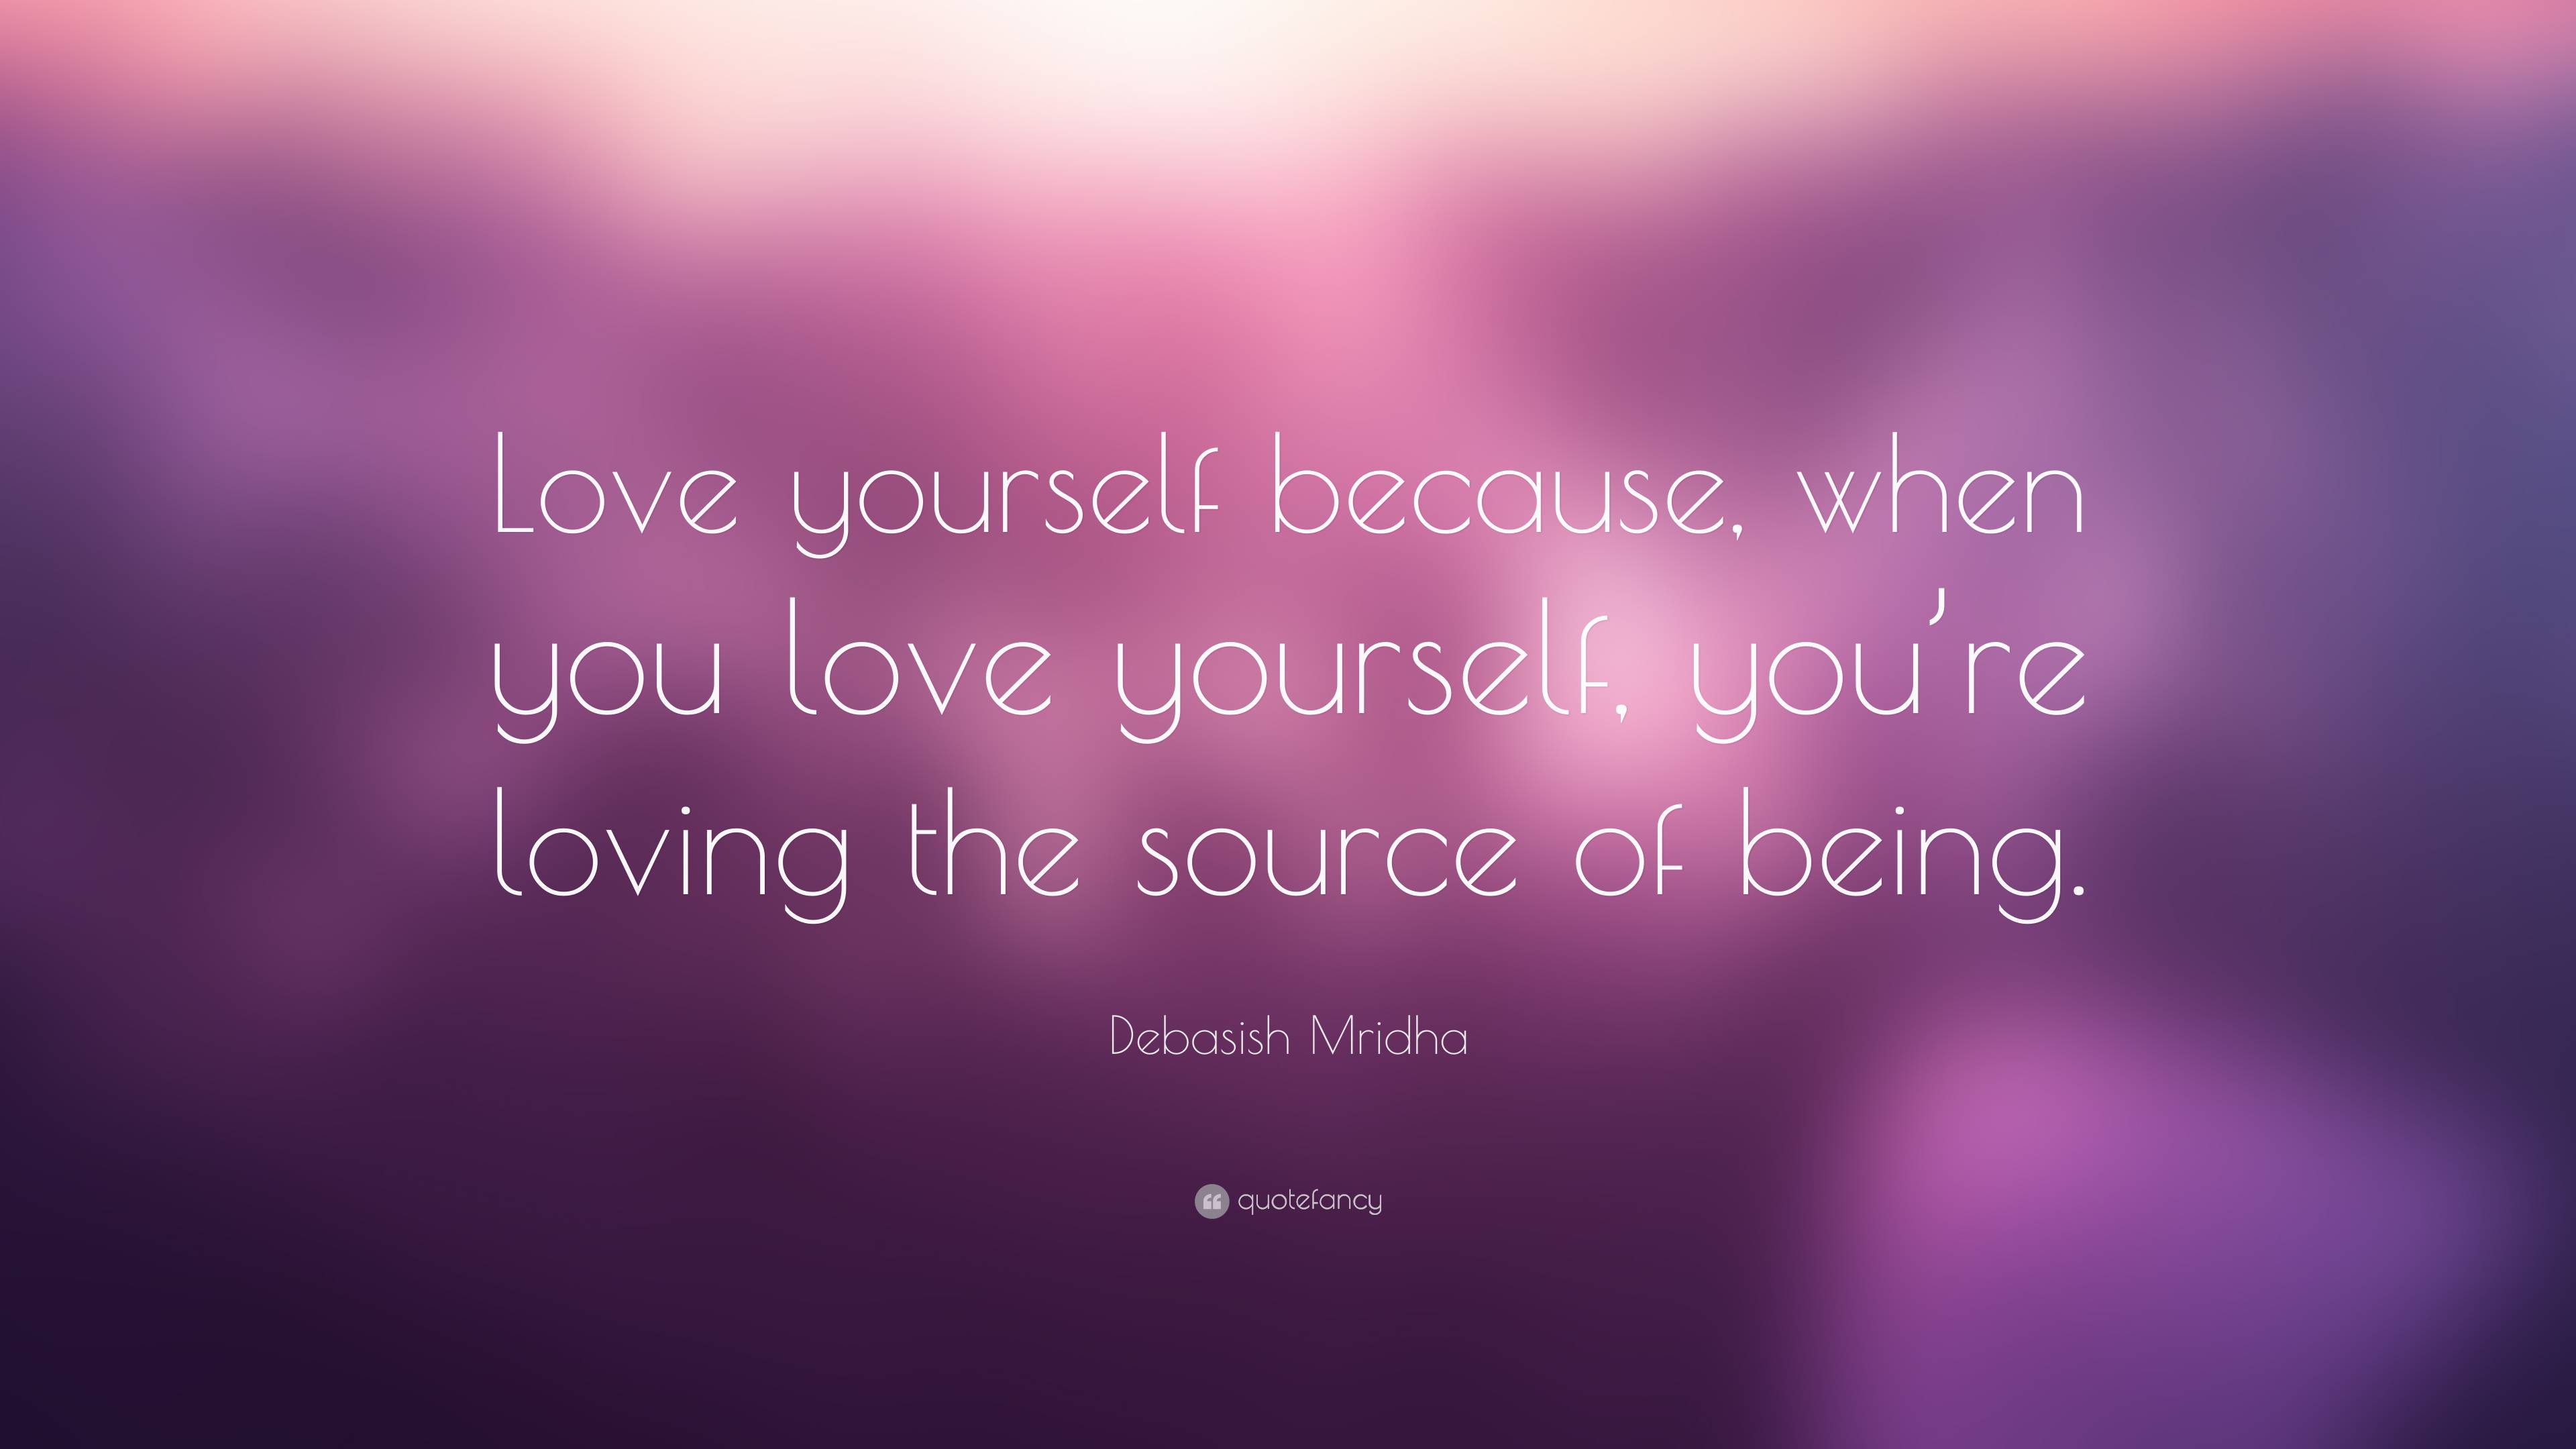 Debasish Mridha Quote: “Love yourself because, when you love yourself ...